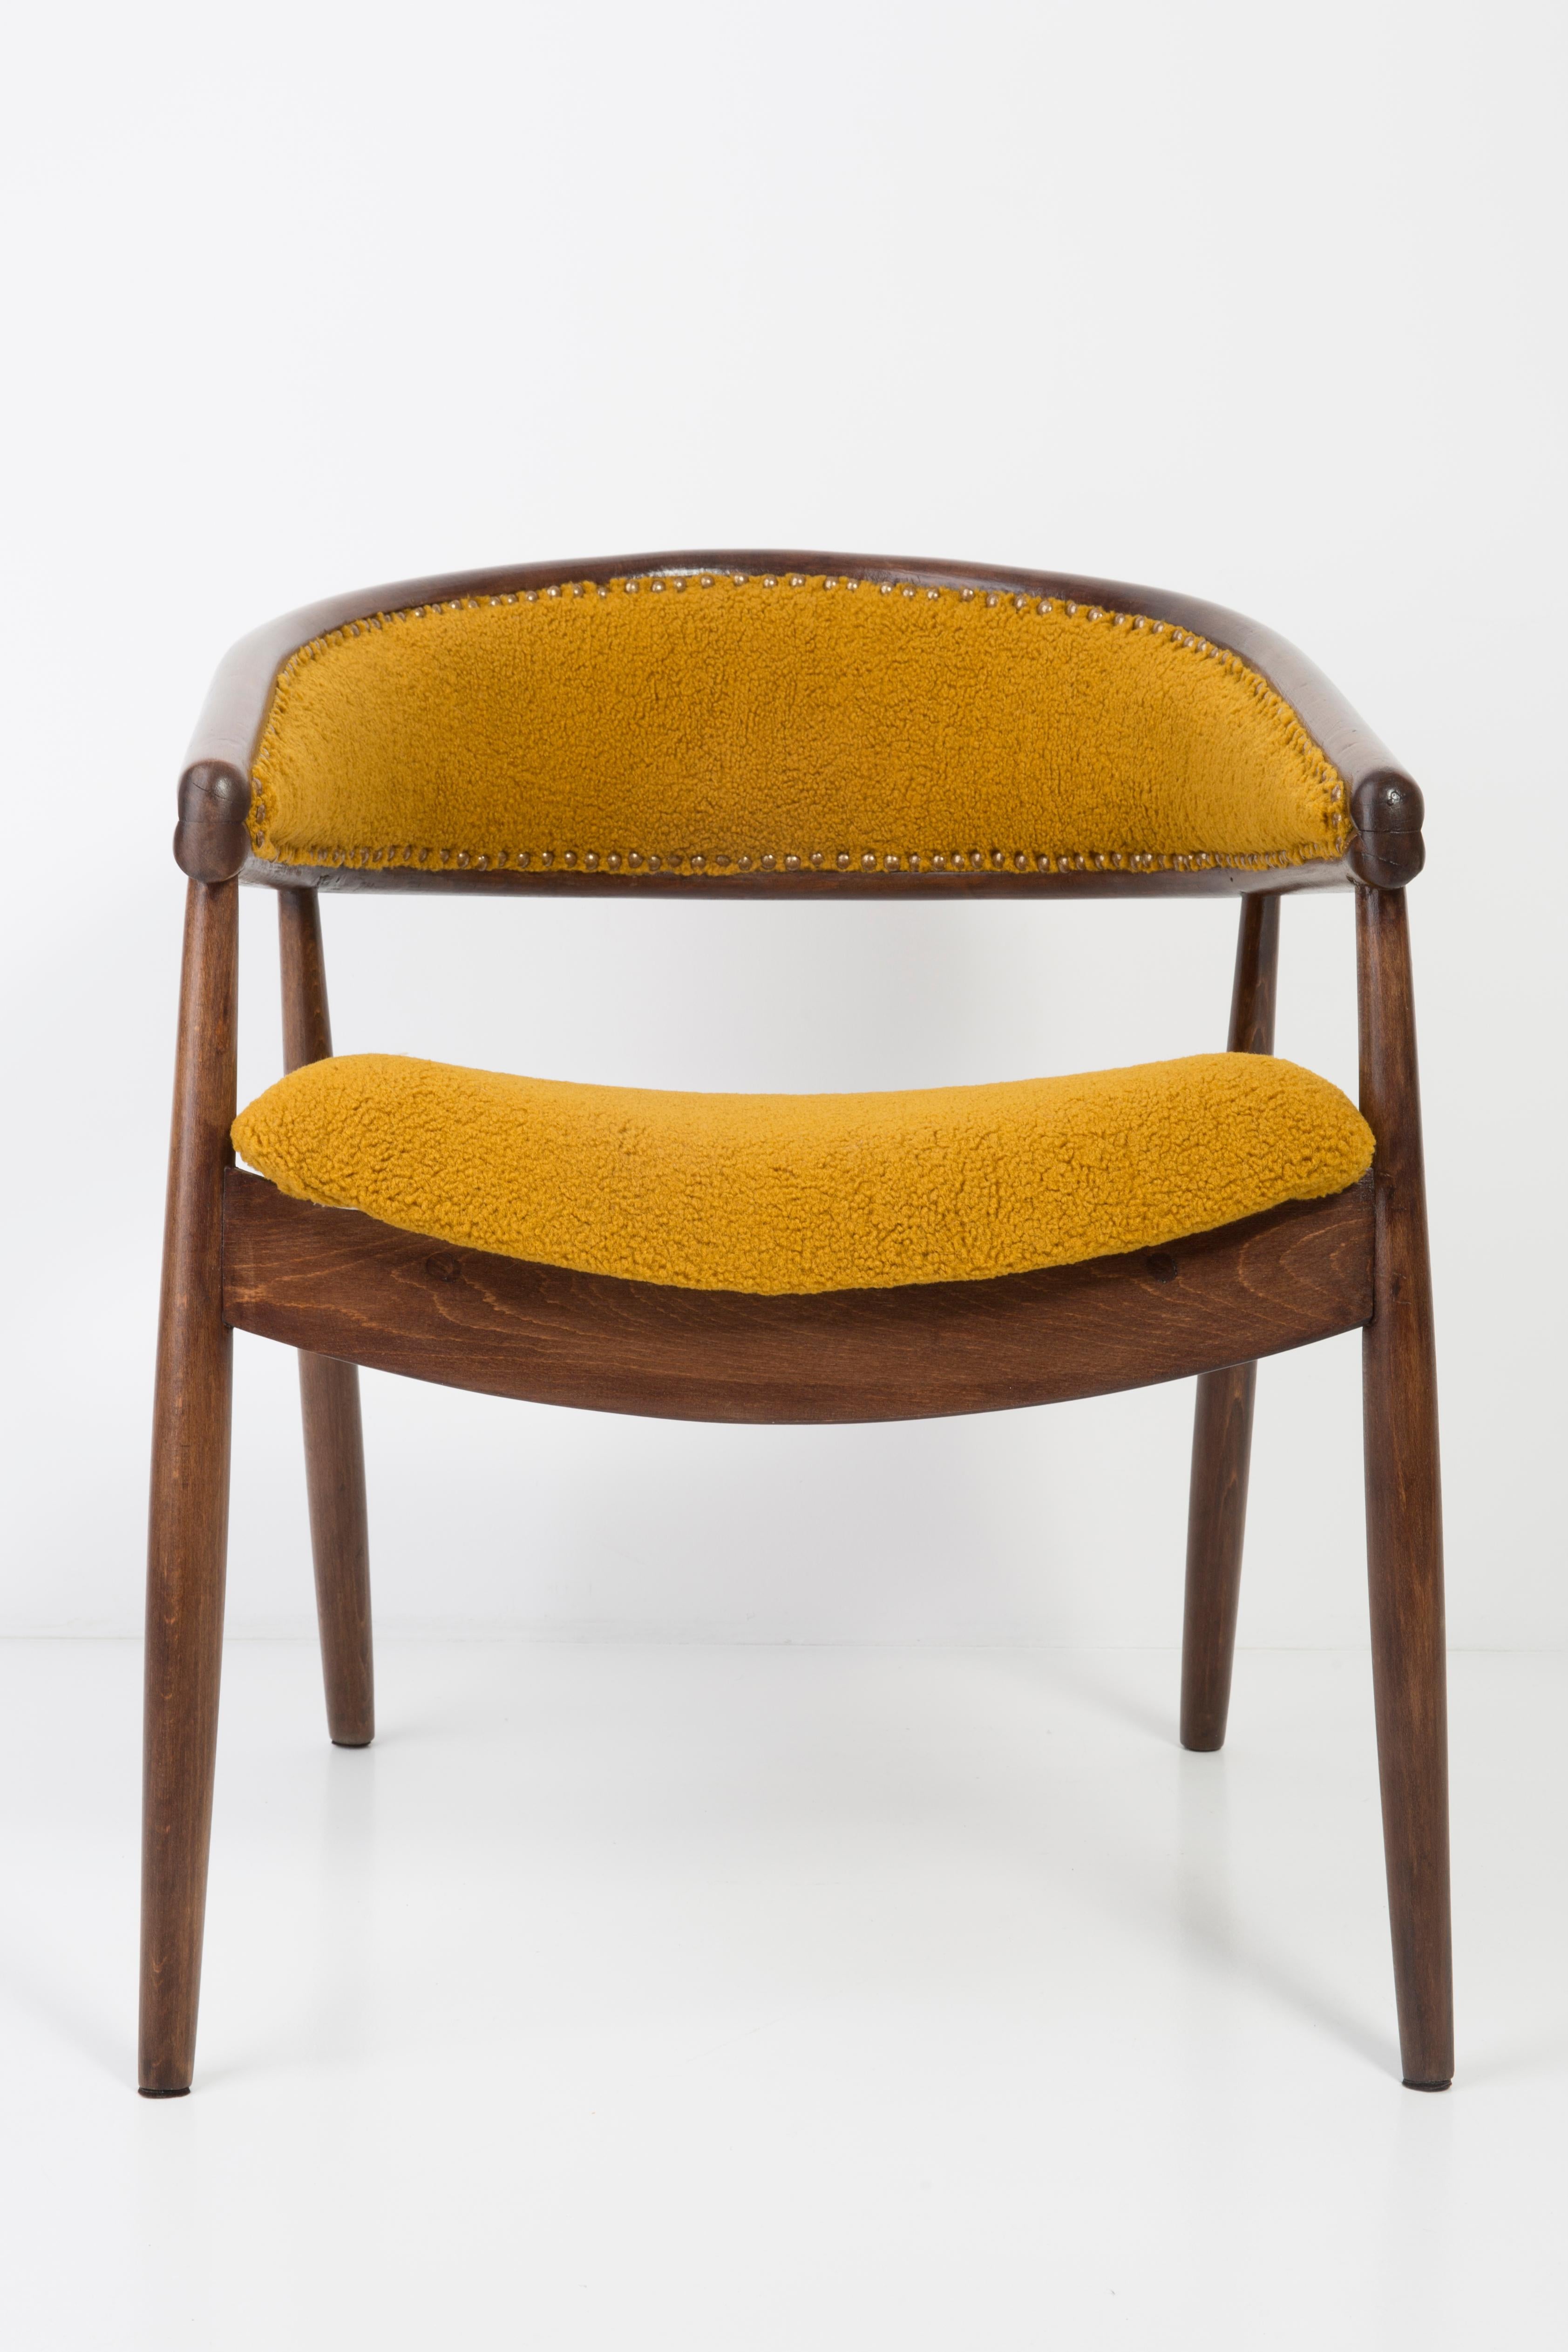 Set of Two James Mont Bent Beech Armchairs, Yellow Ochra Boucle, 1960s For Sale 4